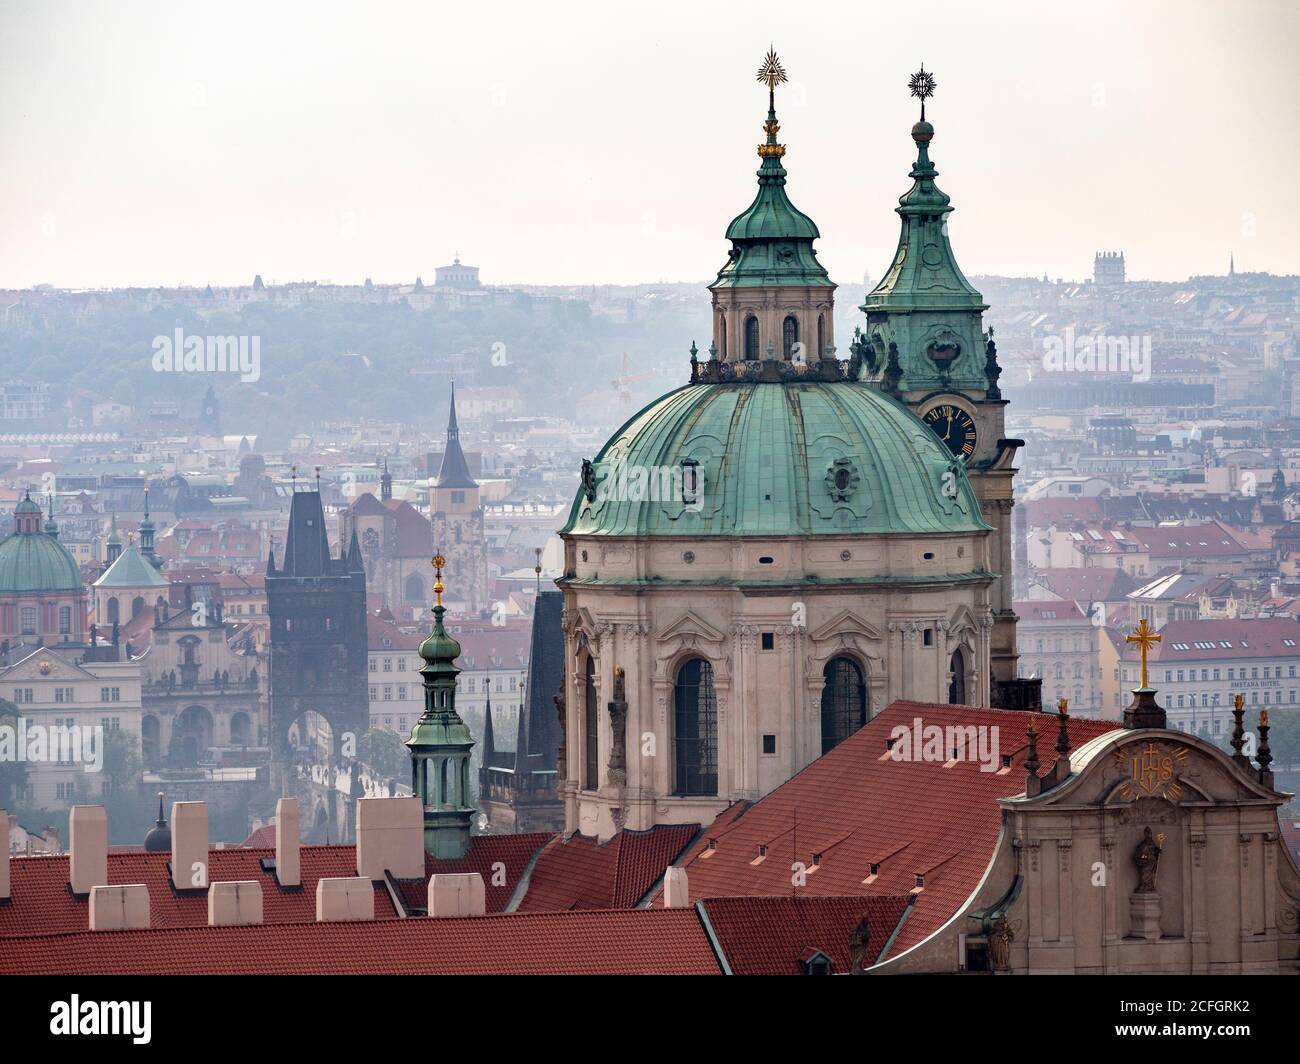 Prague From the Castle: An early morning misty overview of the city and its spires from the castle grounds. The dome of St Nicholas dominates the foregorund  with the Charles Bridge in the middle ground. Stock Photo